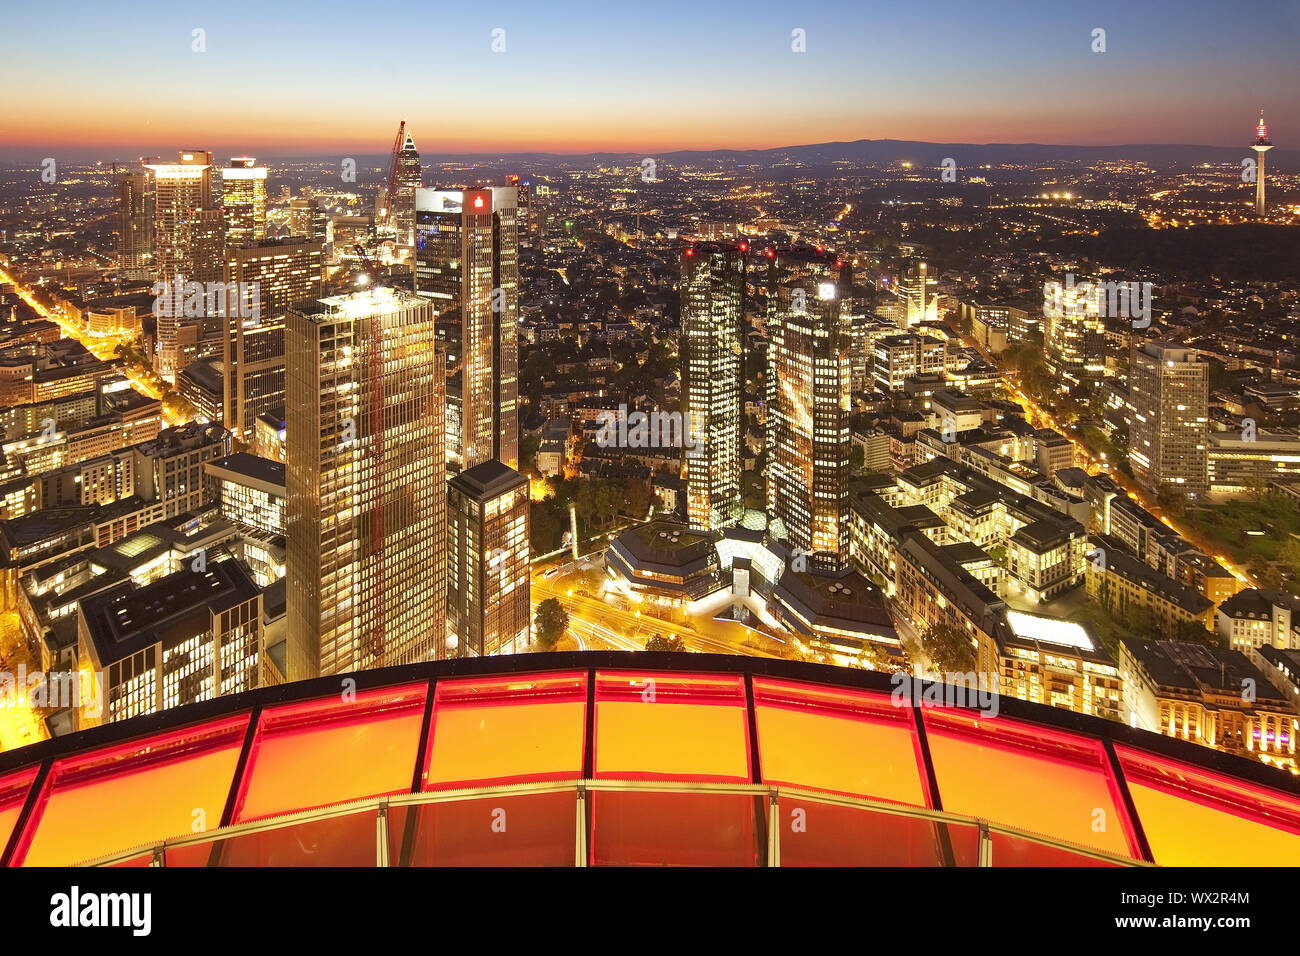 view from Main Tower to the town in the evening light, Frankfurt am Main, Hesse, Germany, Europe Stock Photo